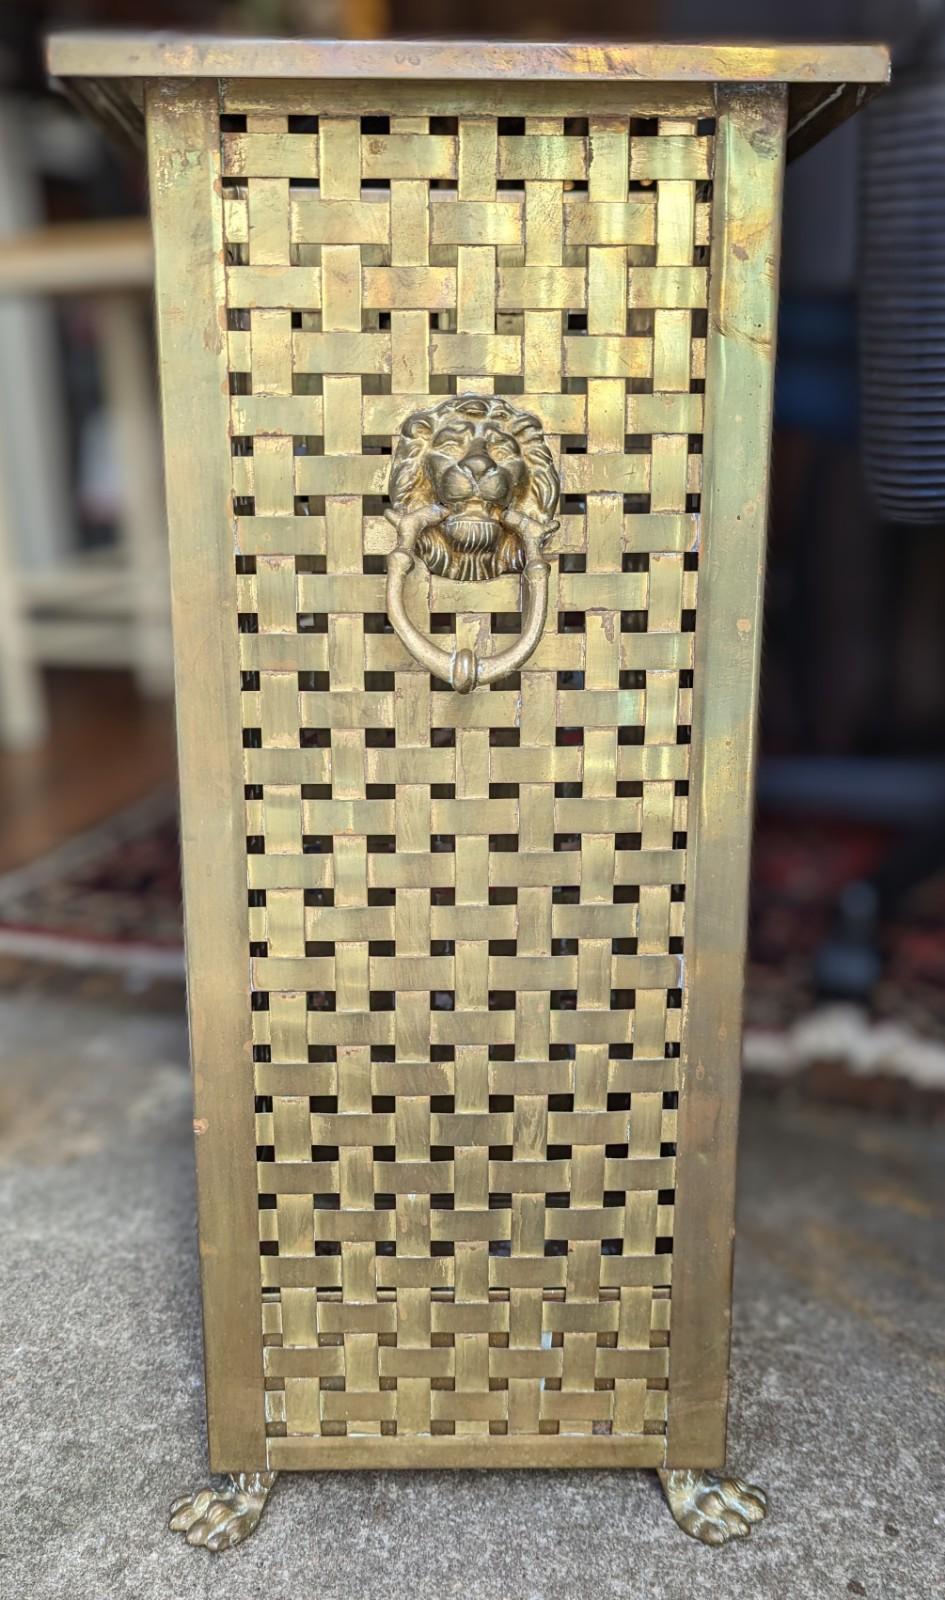 Detailed woven brass umbrella holder stand with doorknocker style lion-head and loop detail on two sides. In the Regency design style, circa early to mid-20th century. In fair well used condition with aged patina to the brass.

Dimensions: 9.75